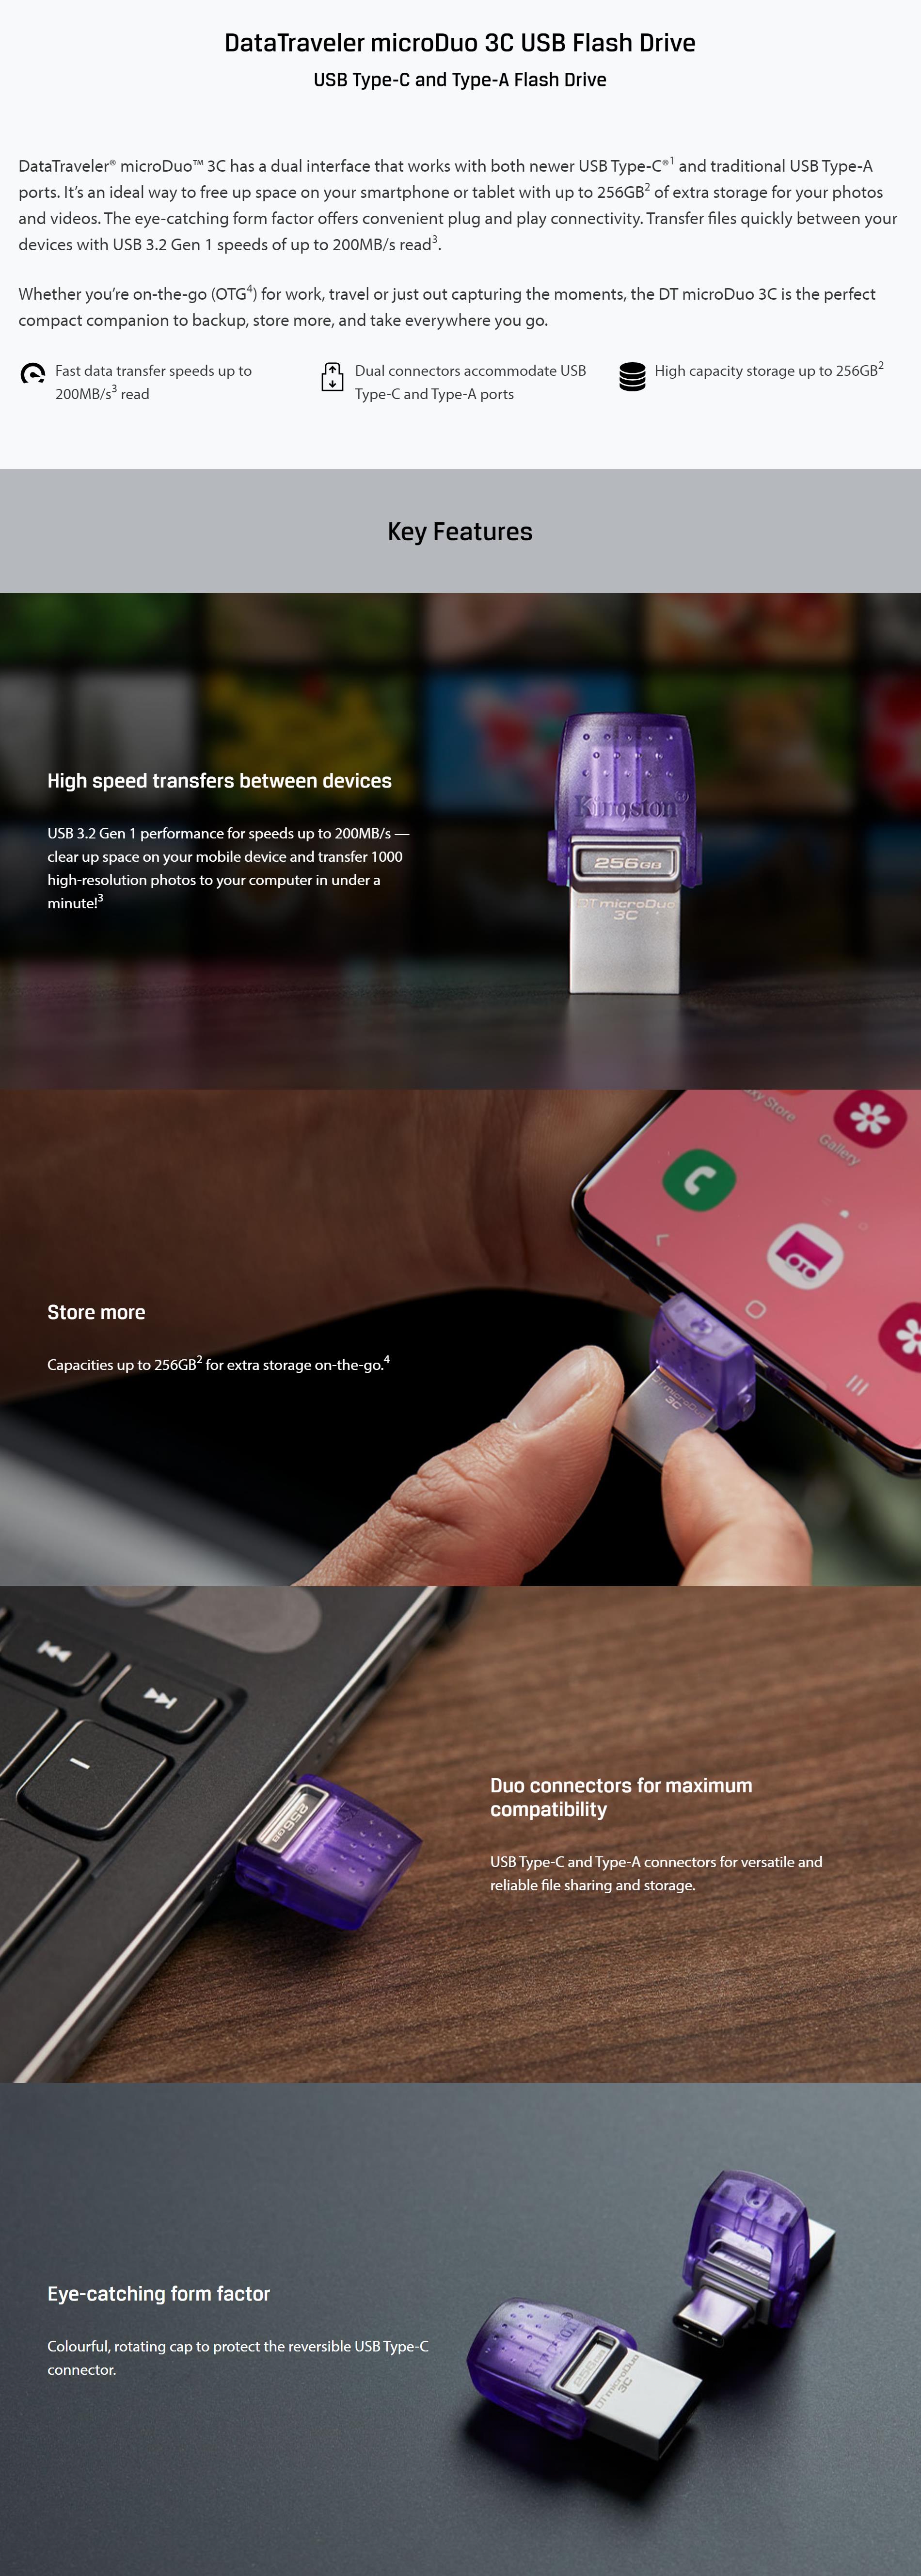 A large marketing image providing additional information about the product Kingston DataTraveler microDuo 3C USB 256GB Flash Drive - Additional alt info not provided